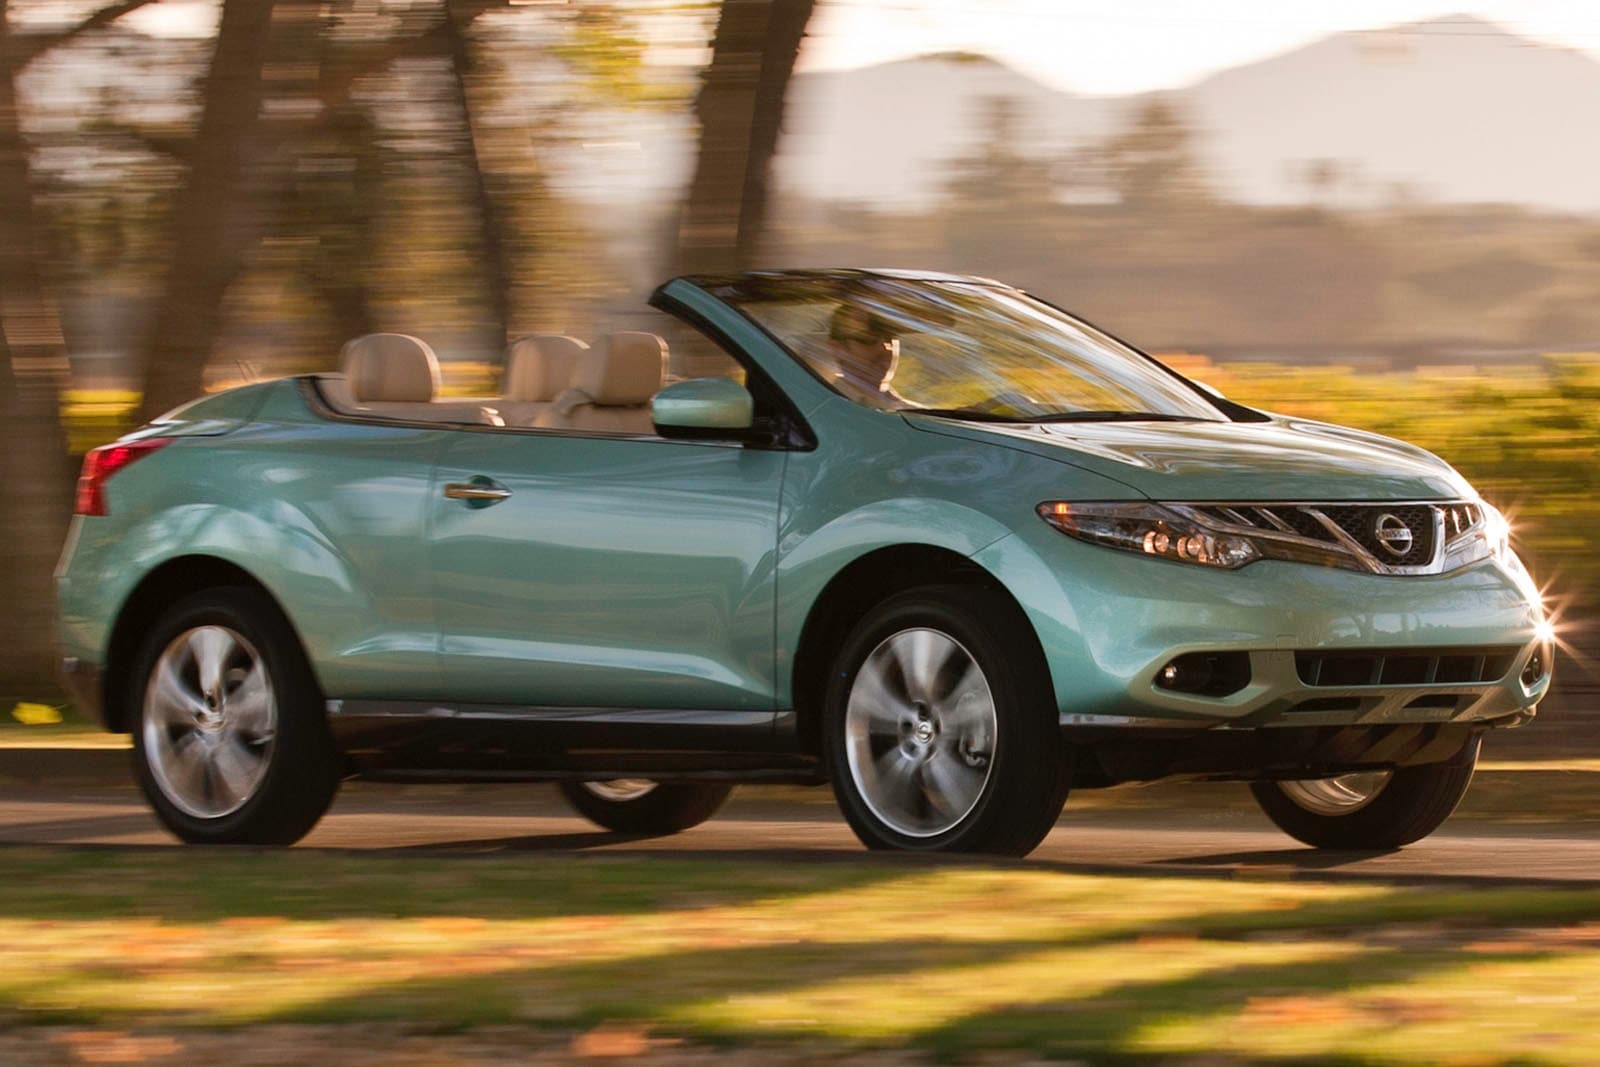 2014 Nissan Murano CrossCabriolet Review & Ratings | Edmunds